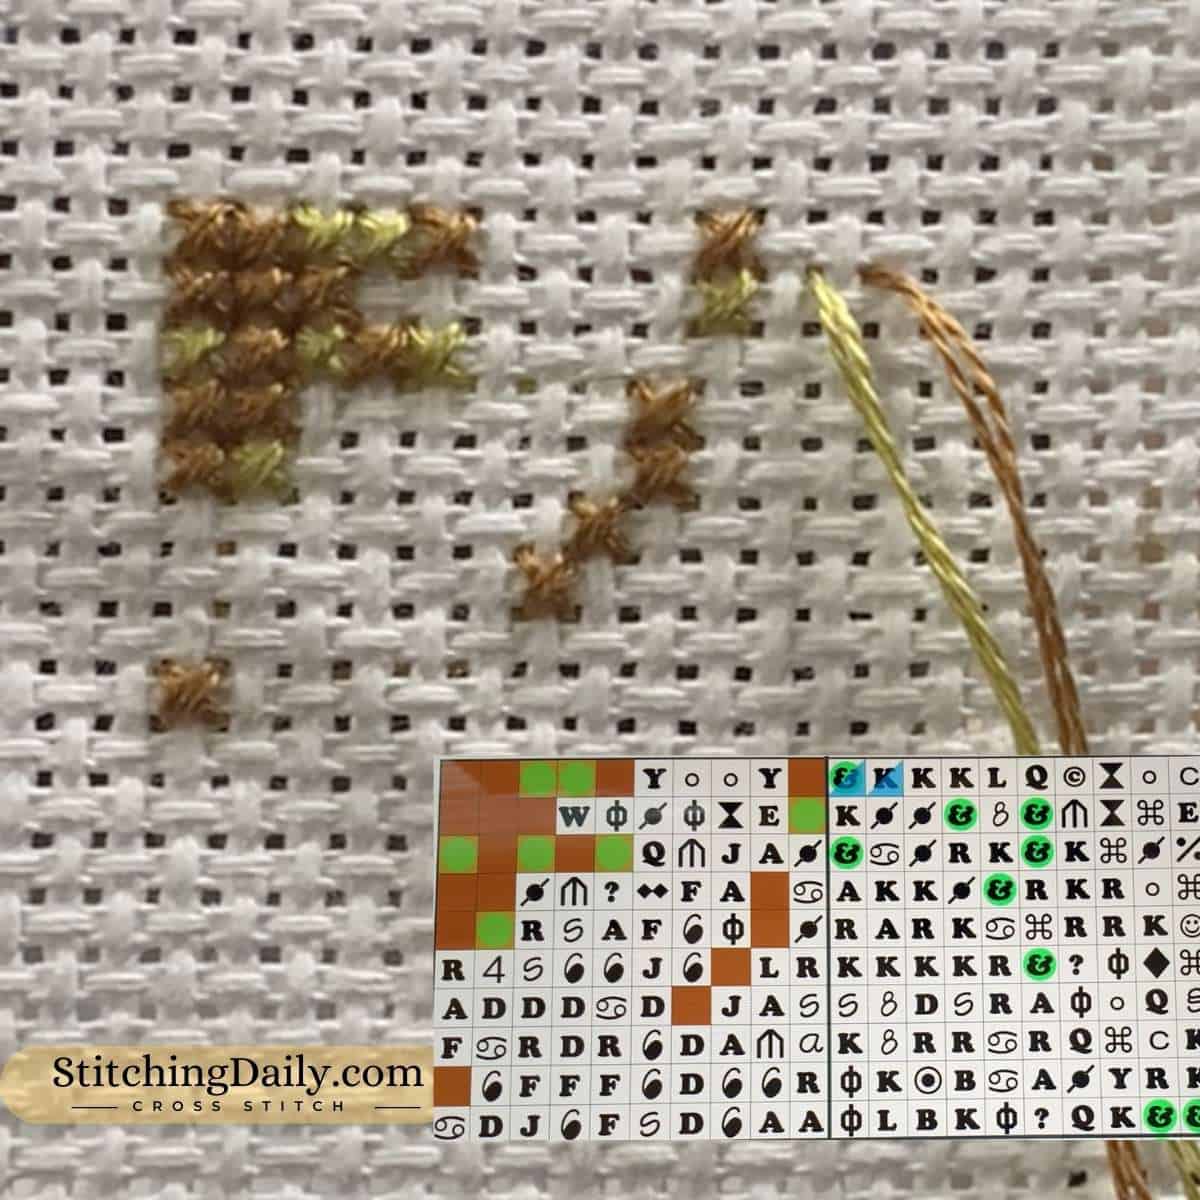 Second color of cross stitch pattern stitched and how it looks on Pattern Keeper app